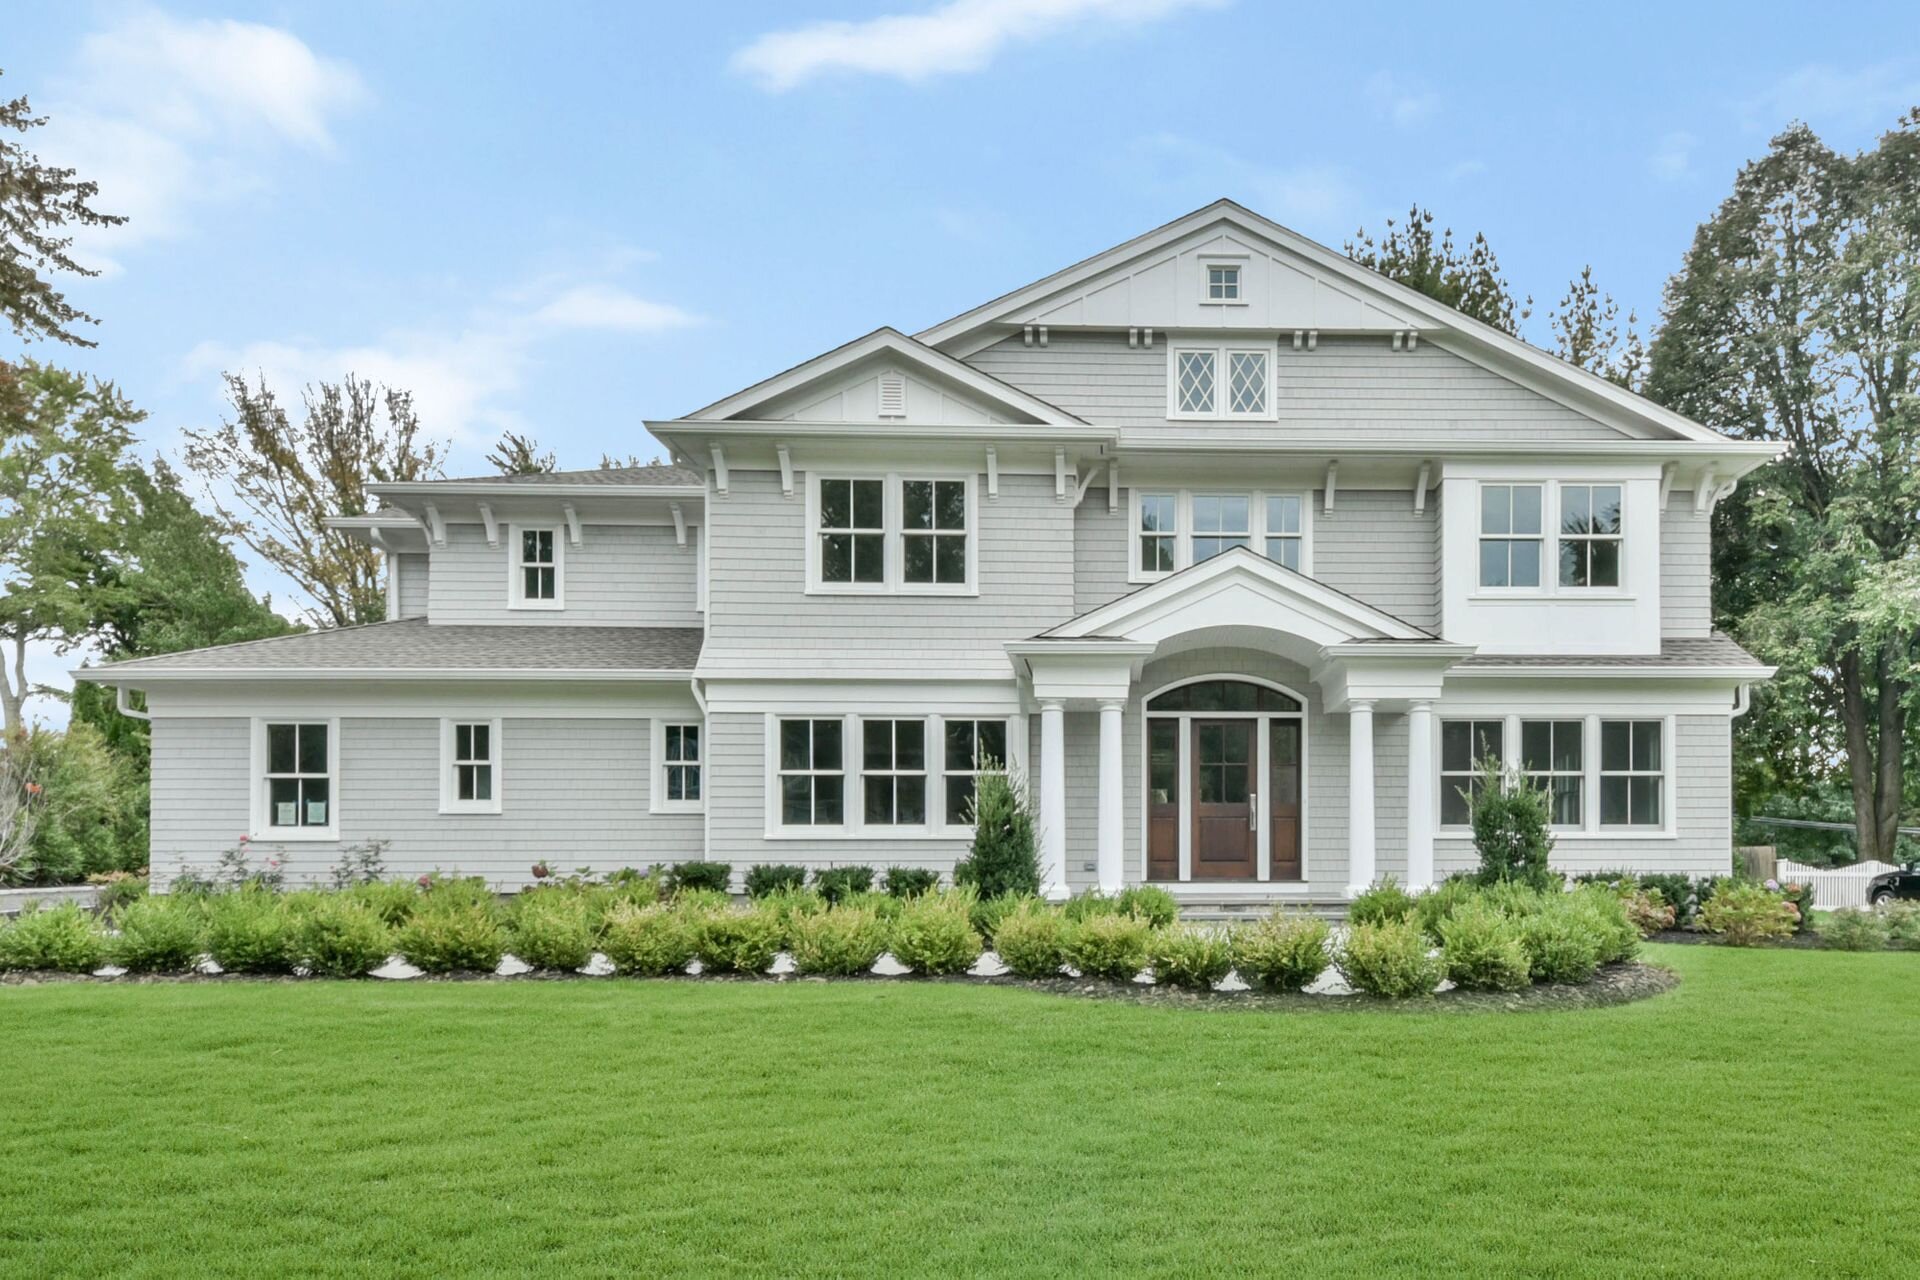 Flower Hill transitional shingle style